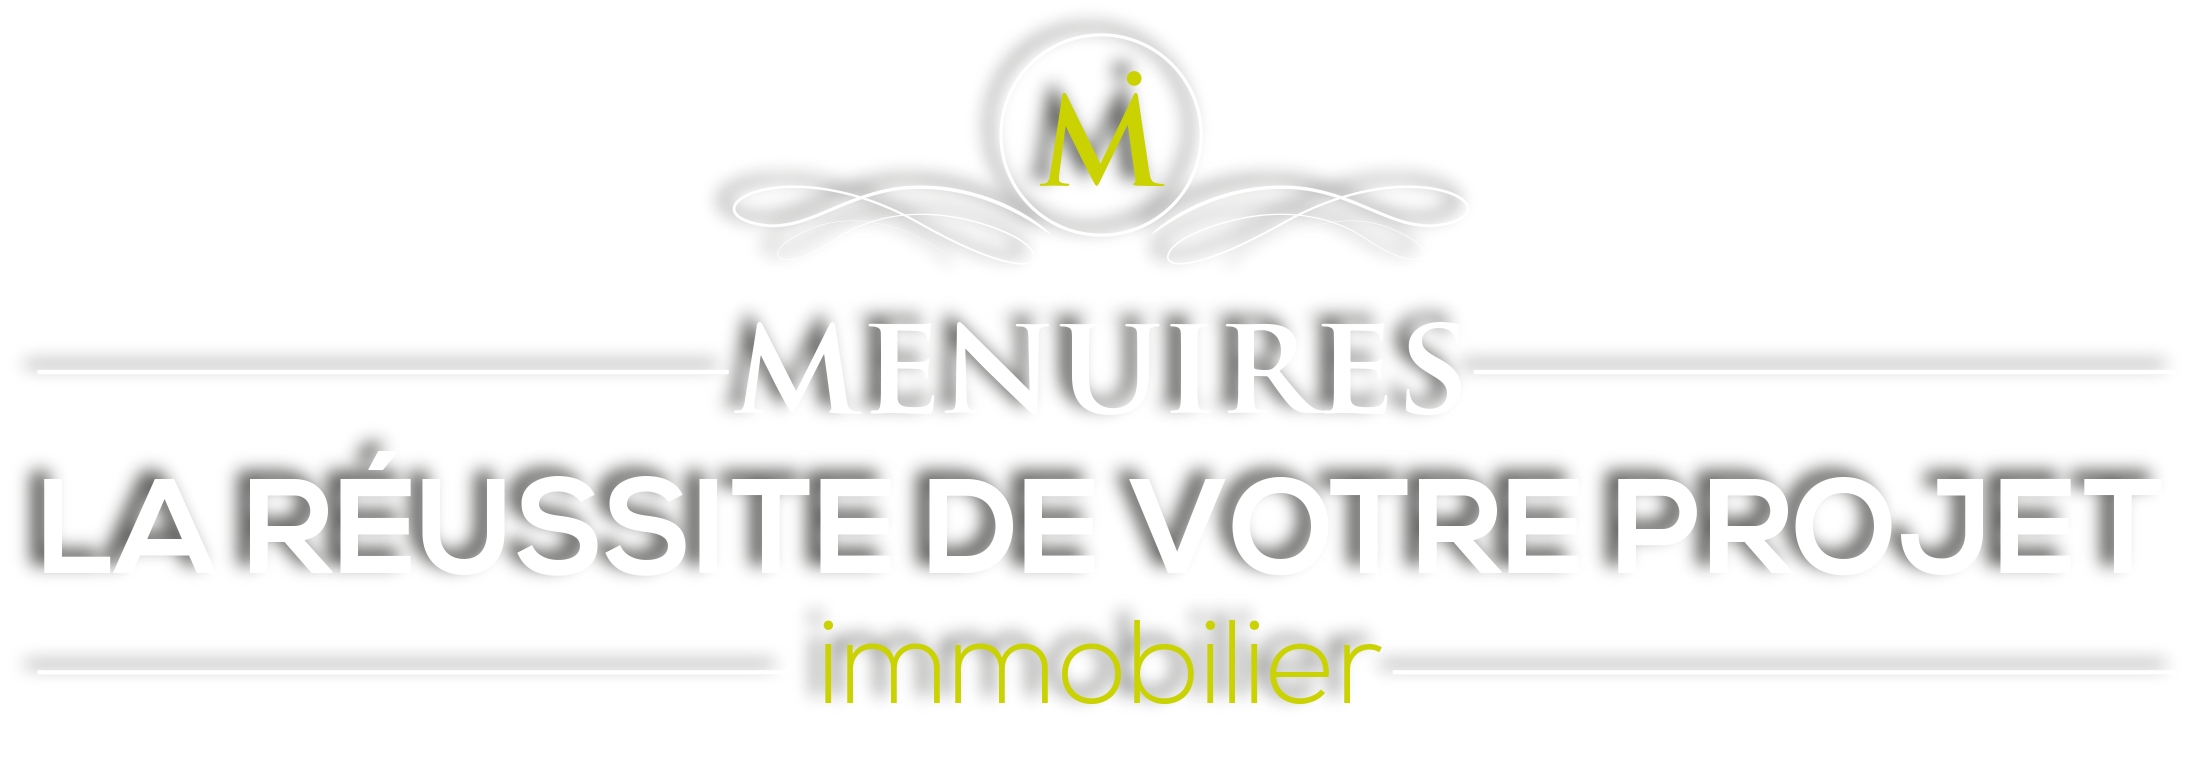 Menuires Immobilier